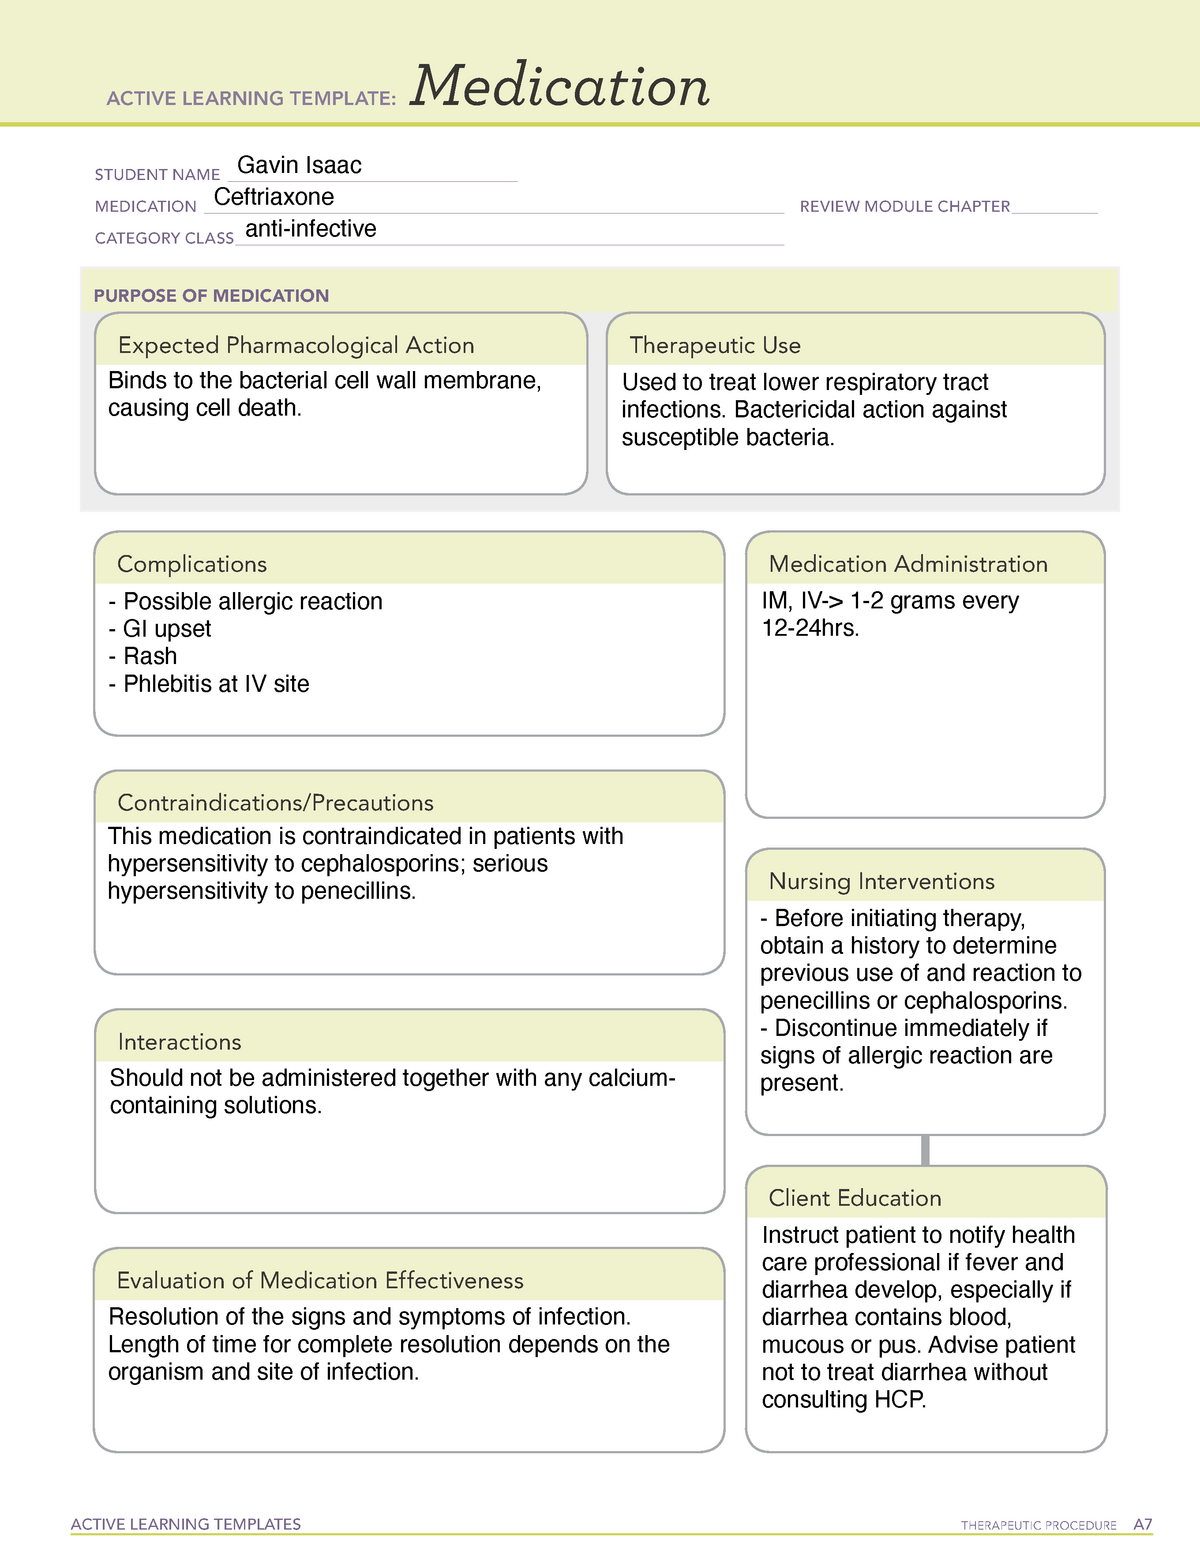 Med Ceftriaxone Active Learning Template ACTIVE LEARNING TEMPLATES